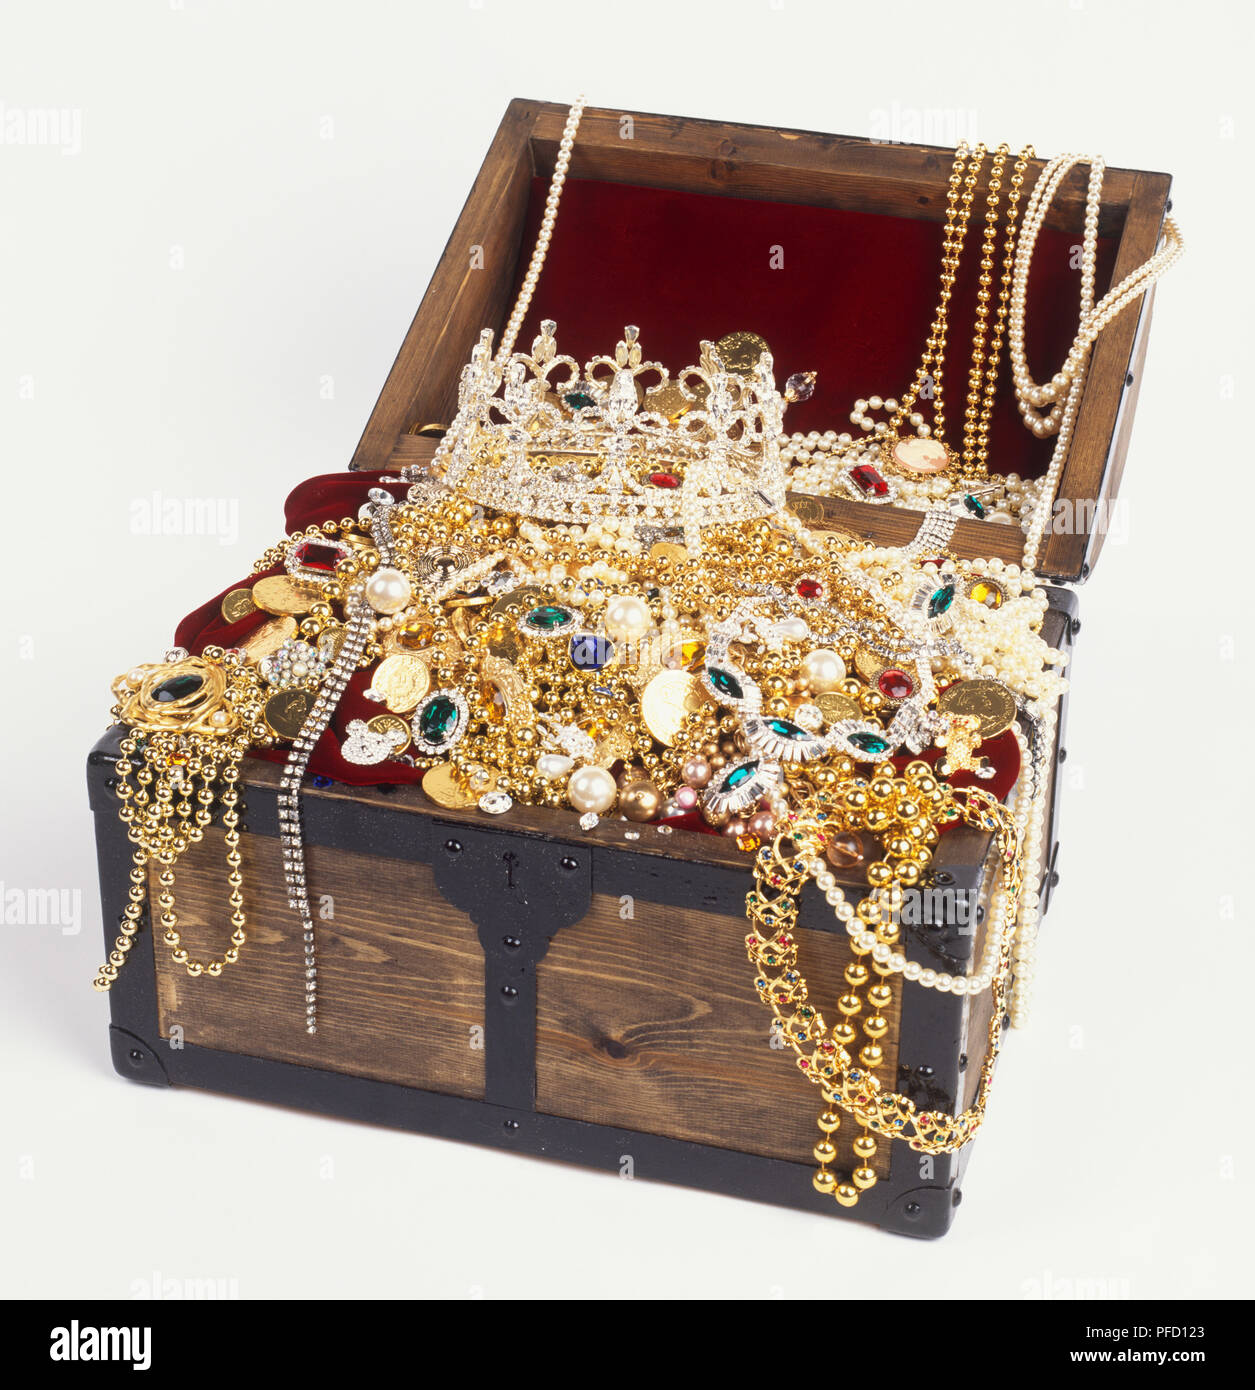 Open treasure chest overflowing with jewellery, elevated view Stock Photo -  Alamy